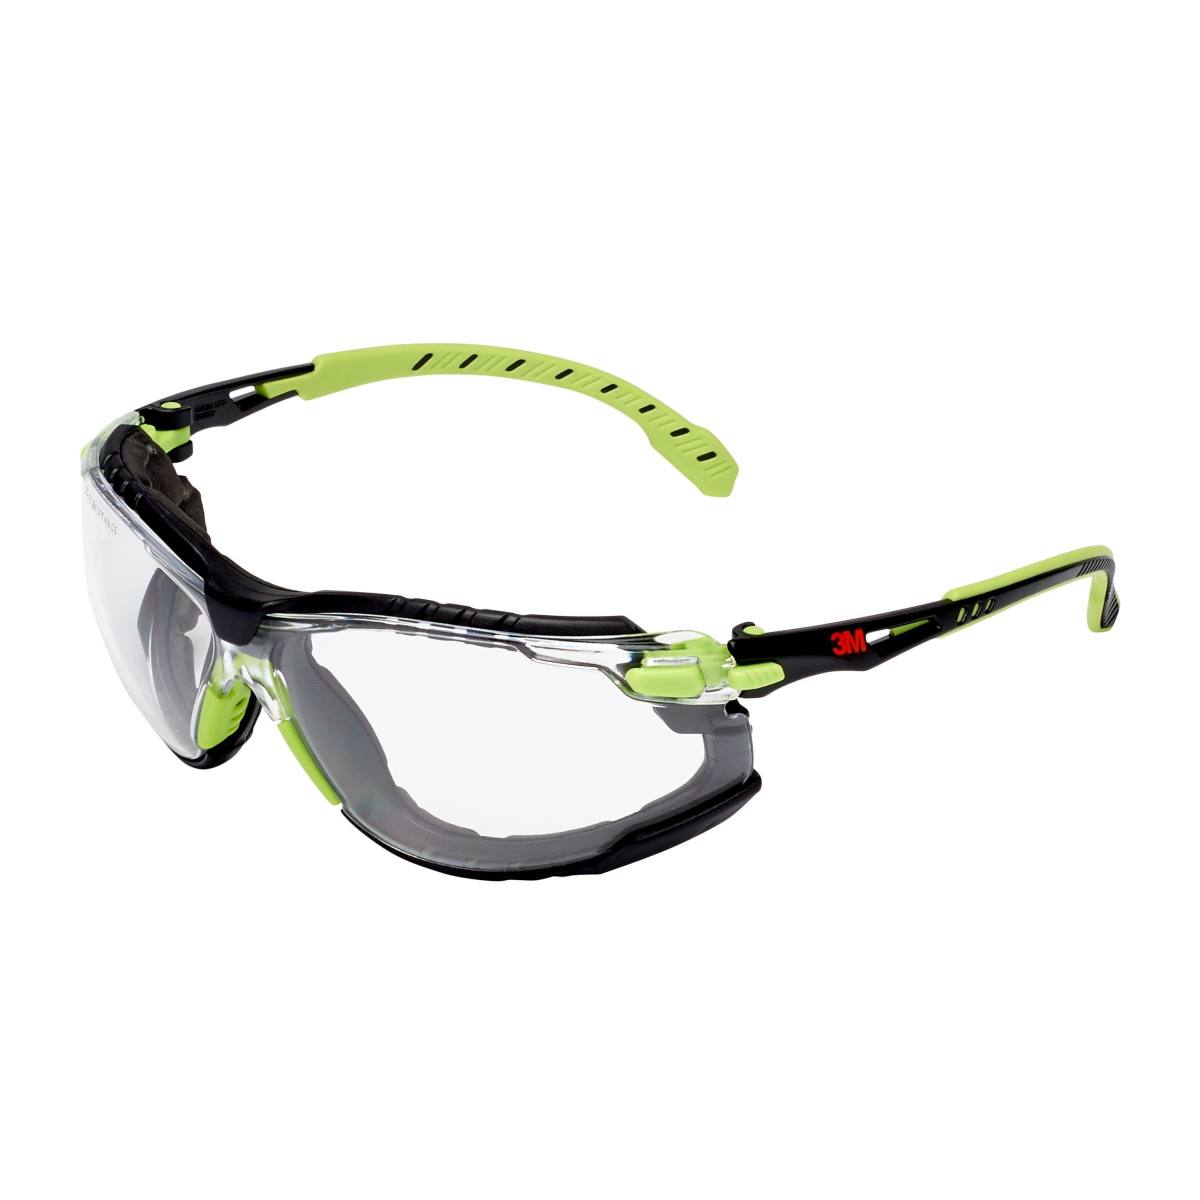 3M Solus 1000 safety spectacles with anti-fog coating, green/black, transparent, with bag S1CG